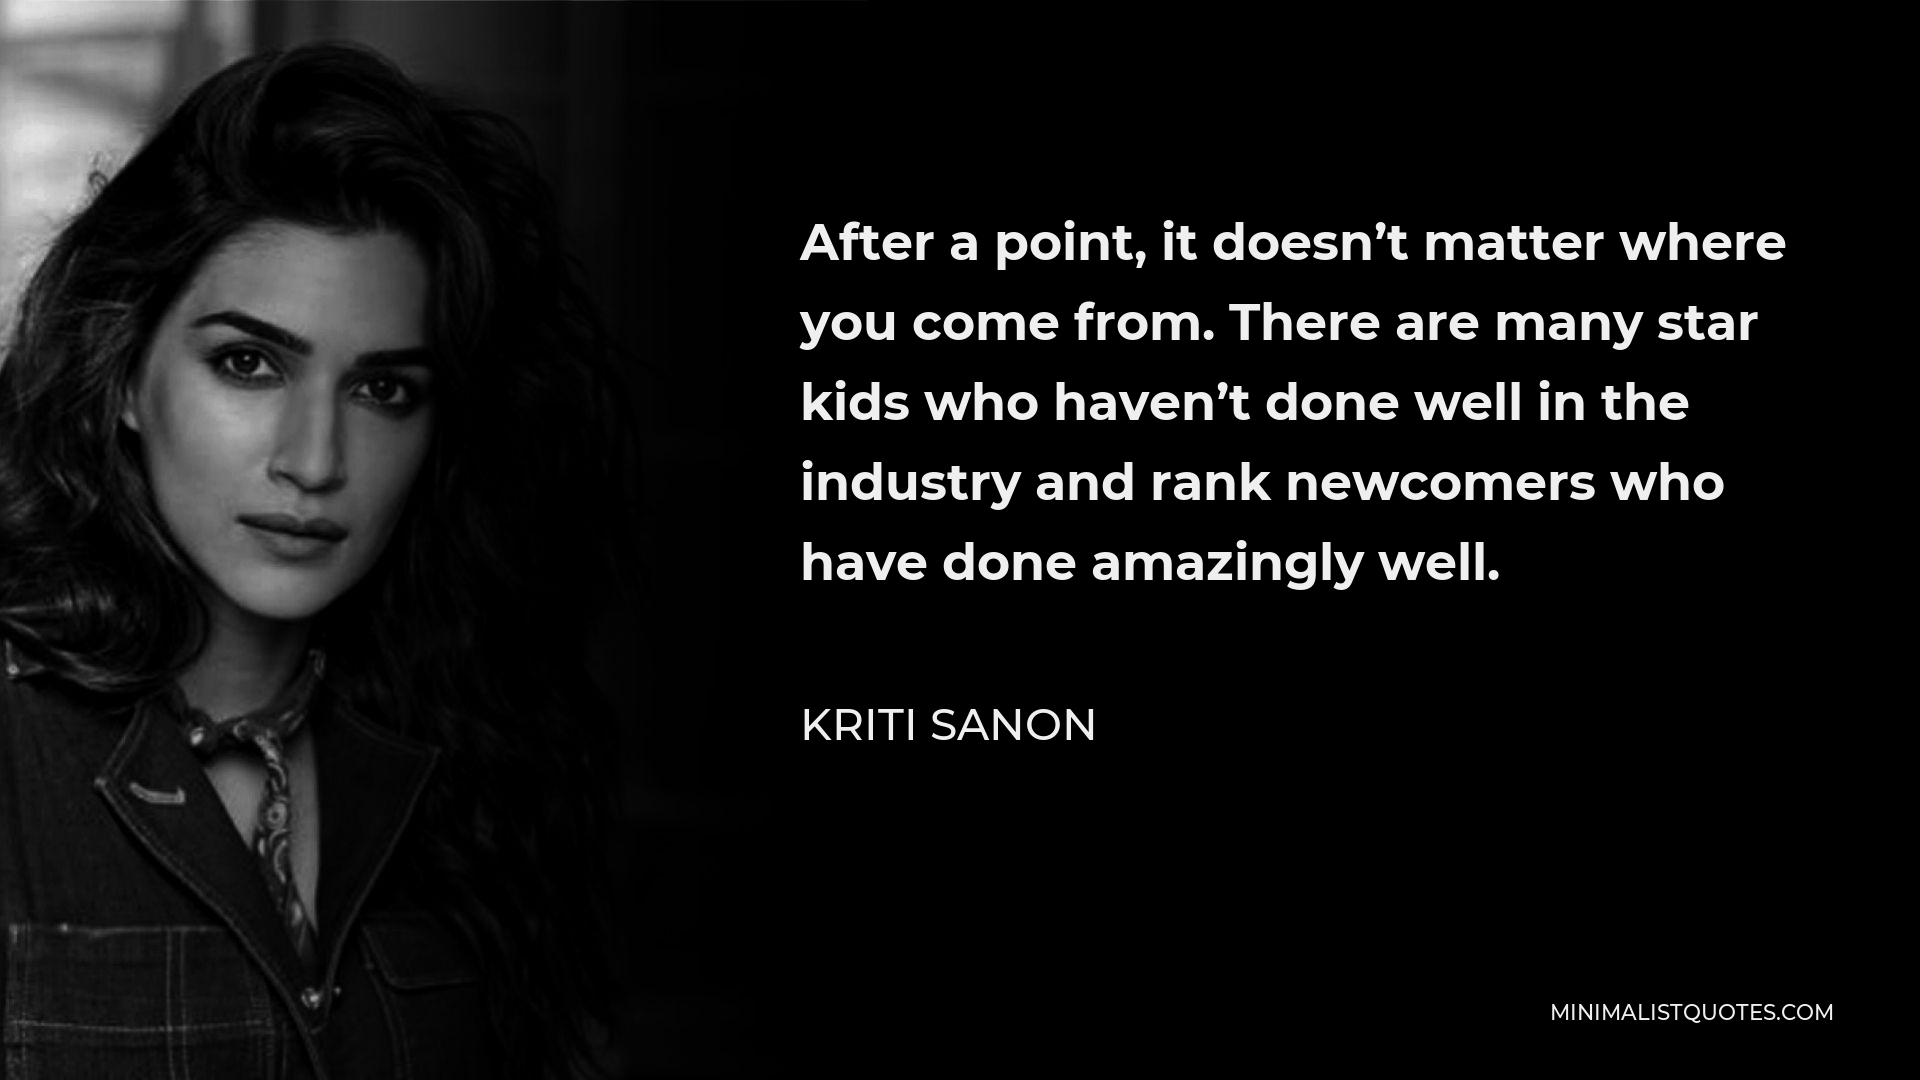 Kriti Sanon Quote After A Point It Doesnt Matter Where You Come From There Are Many Star